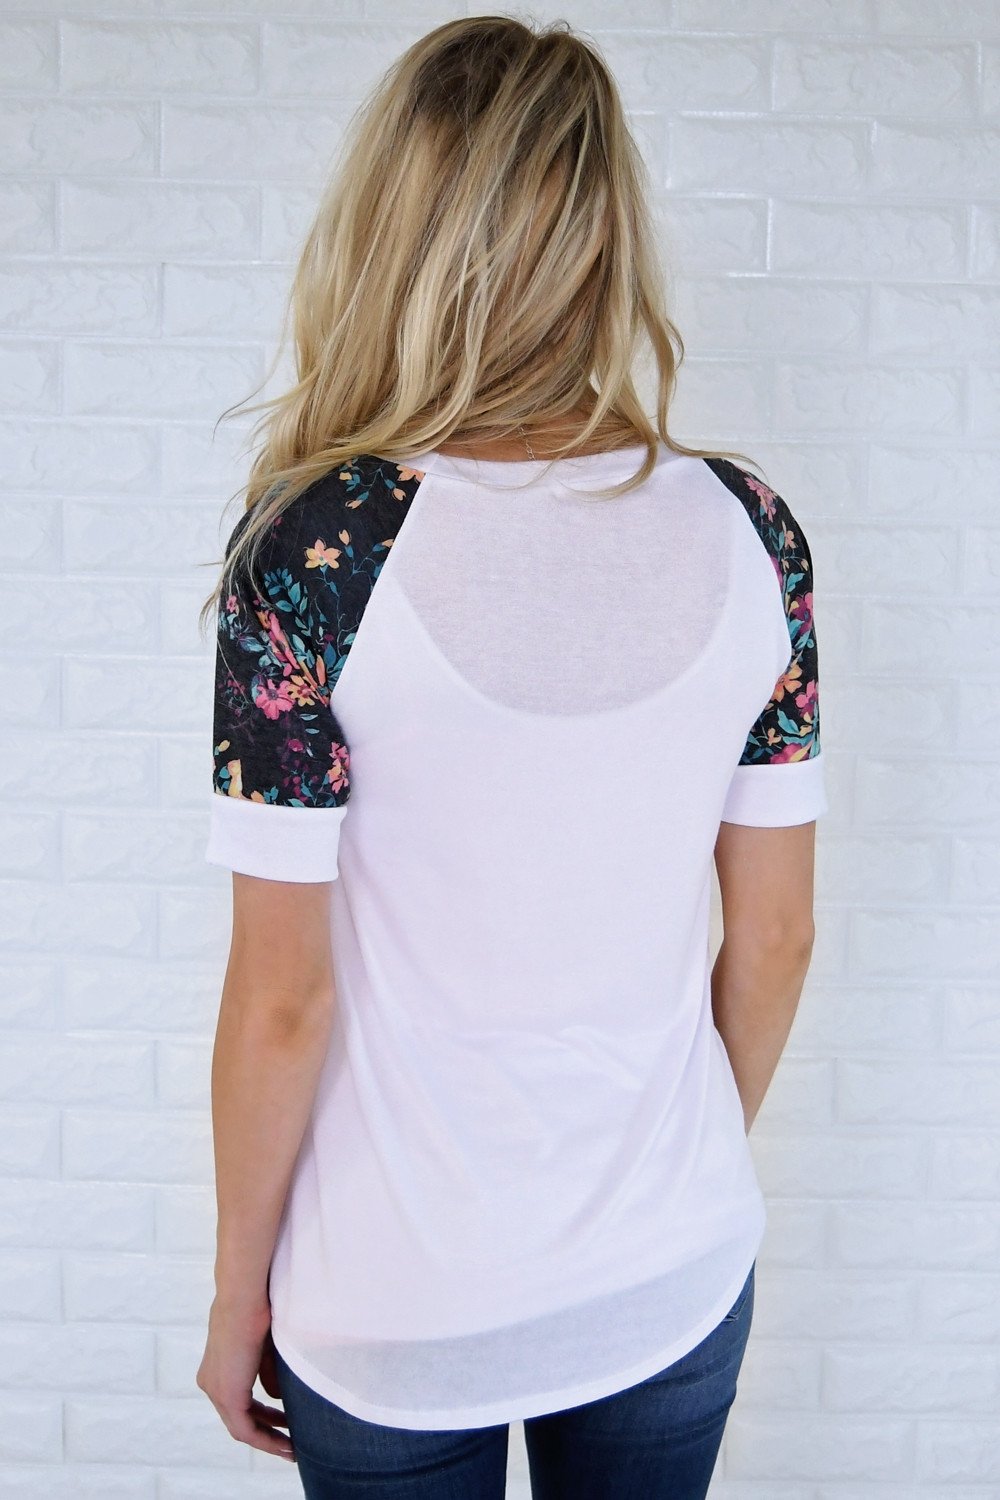 Feeling Pretty Floral Ivory Top